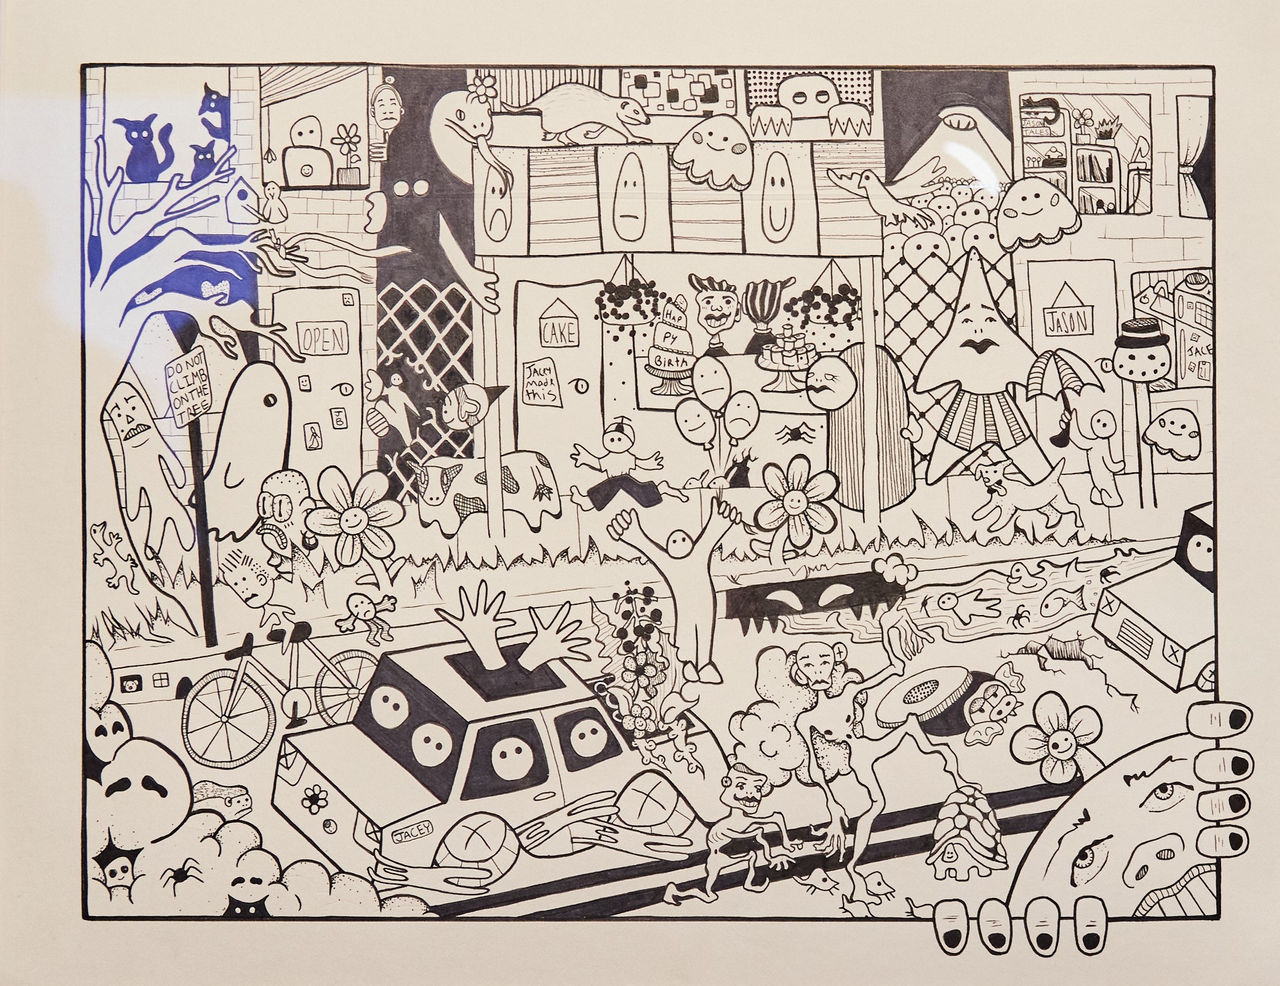 Downtown Funk by Jason Breden, micron pen on paper, 11 x 14 inches, 2022.